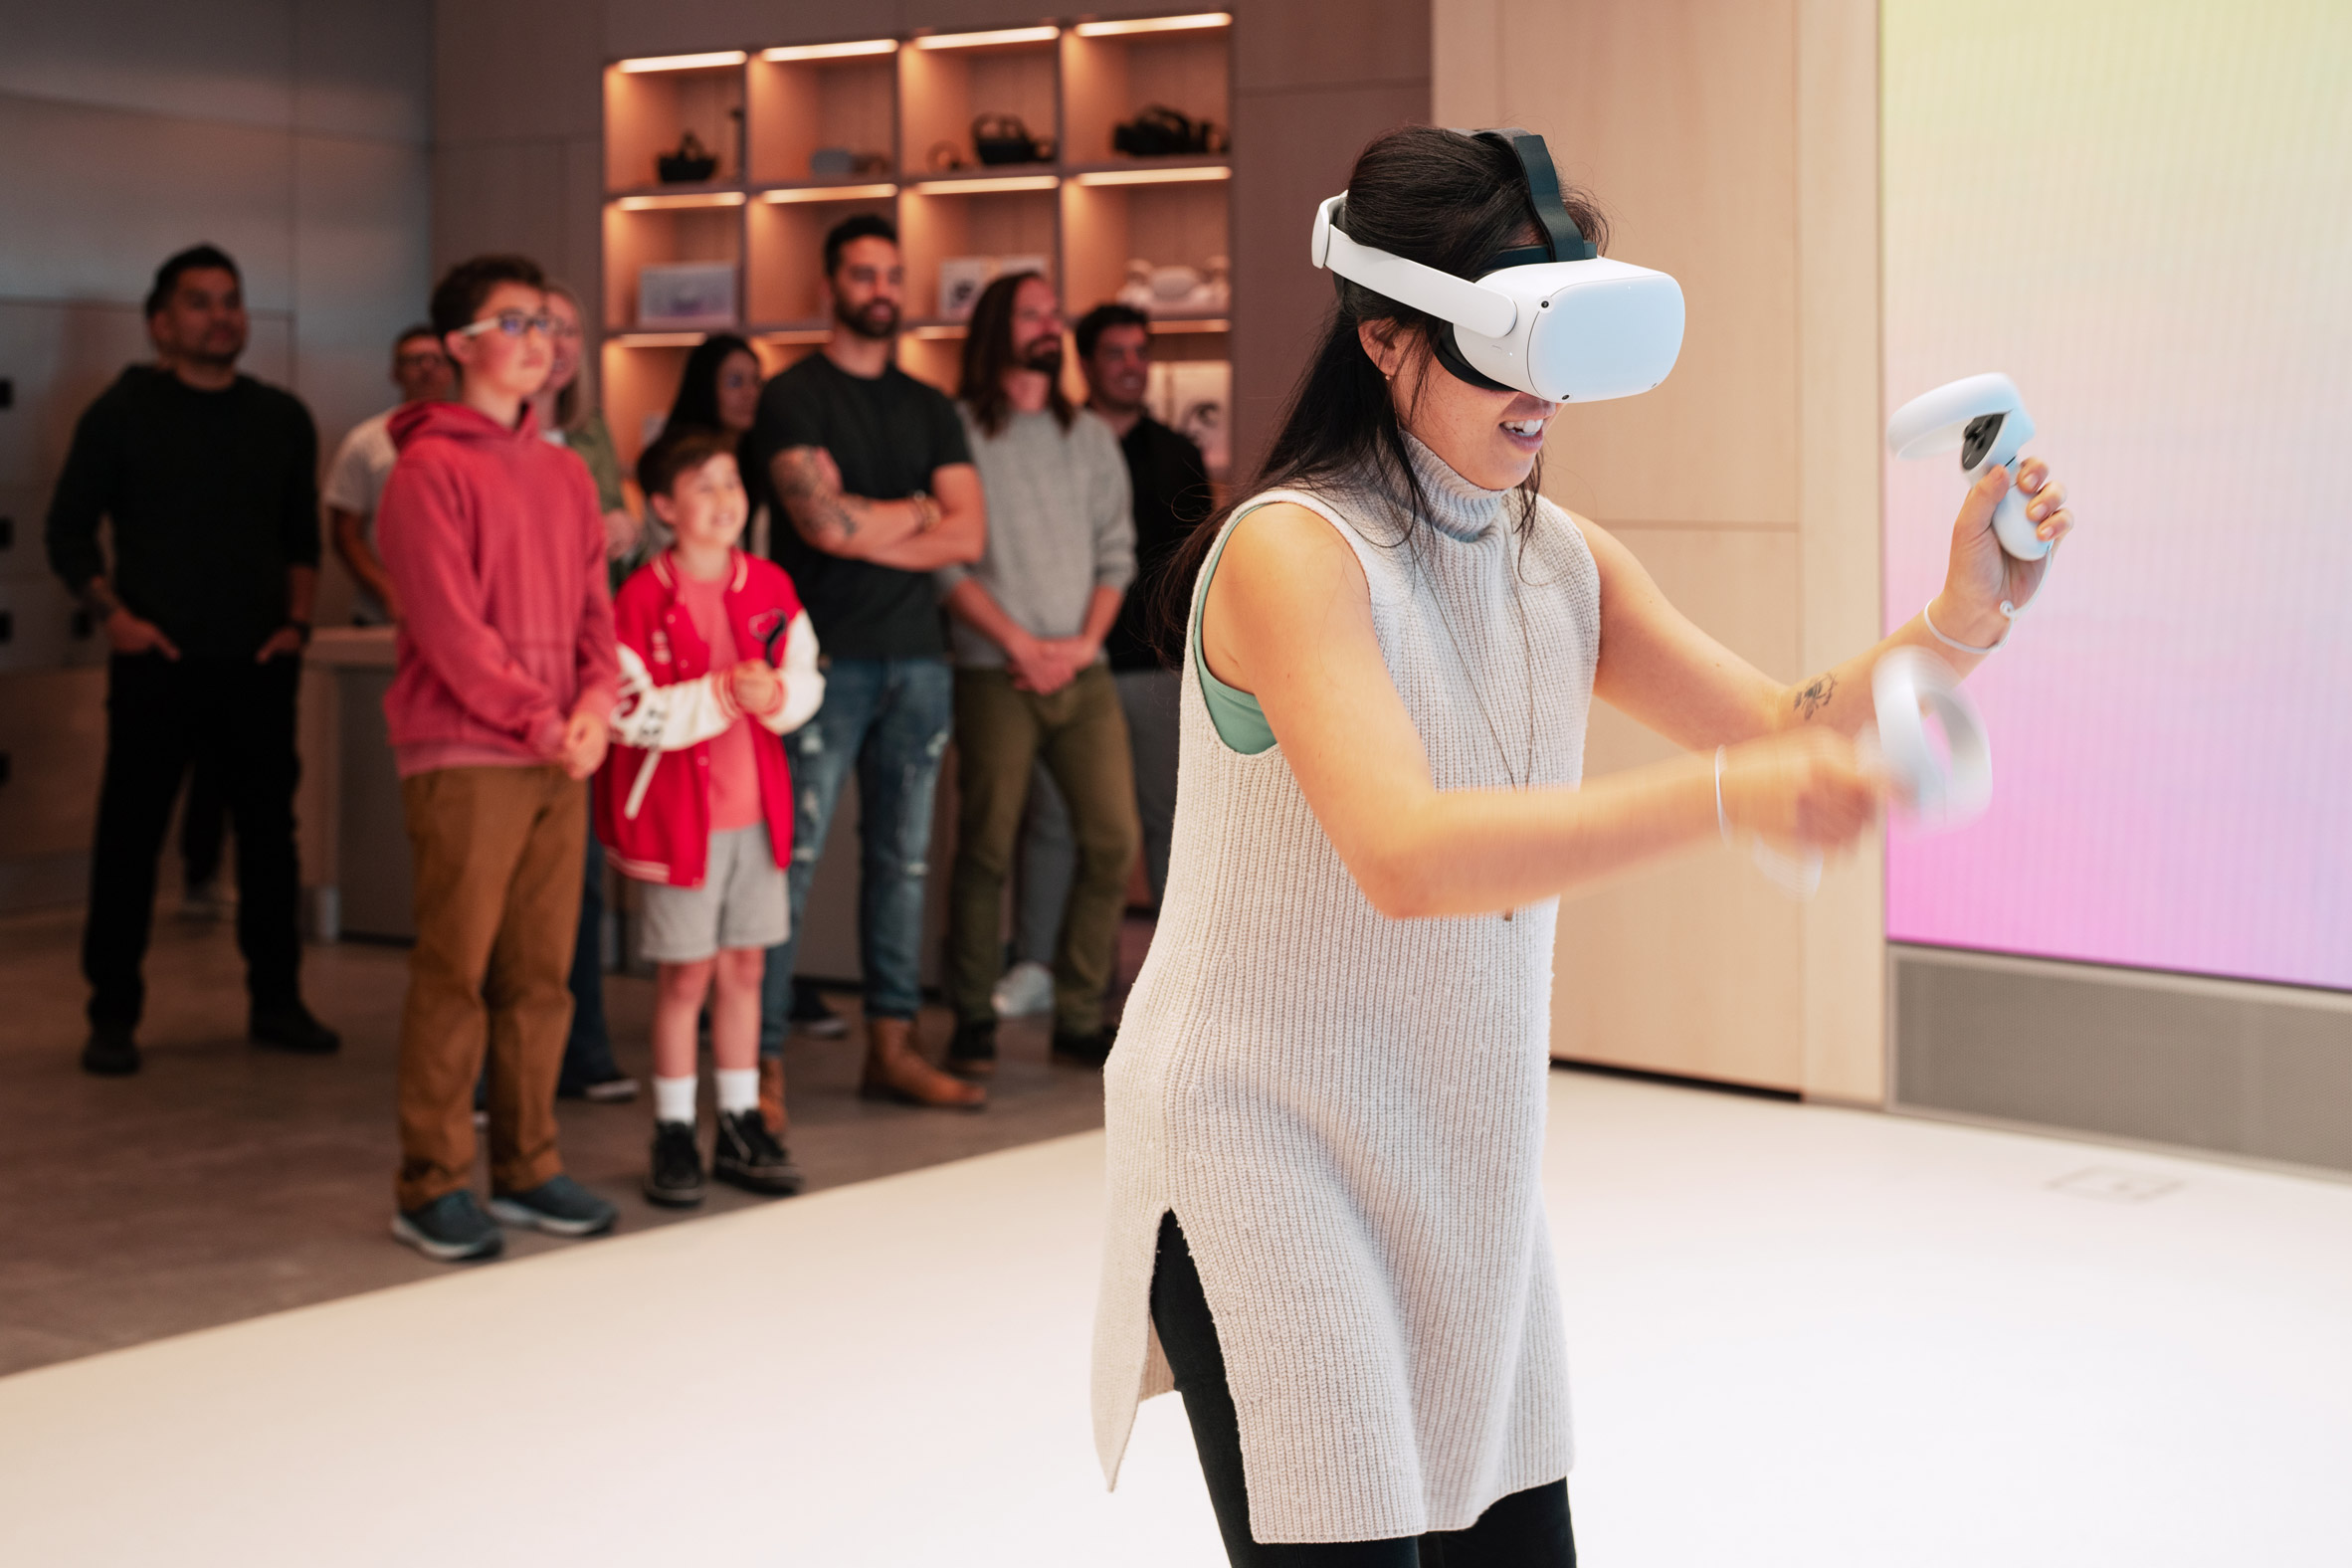 A woman playing a game on a virtual reality headset